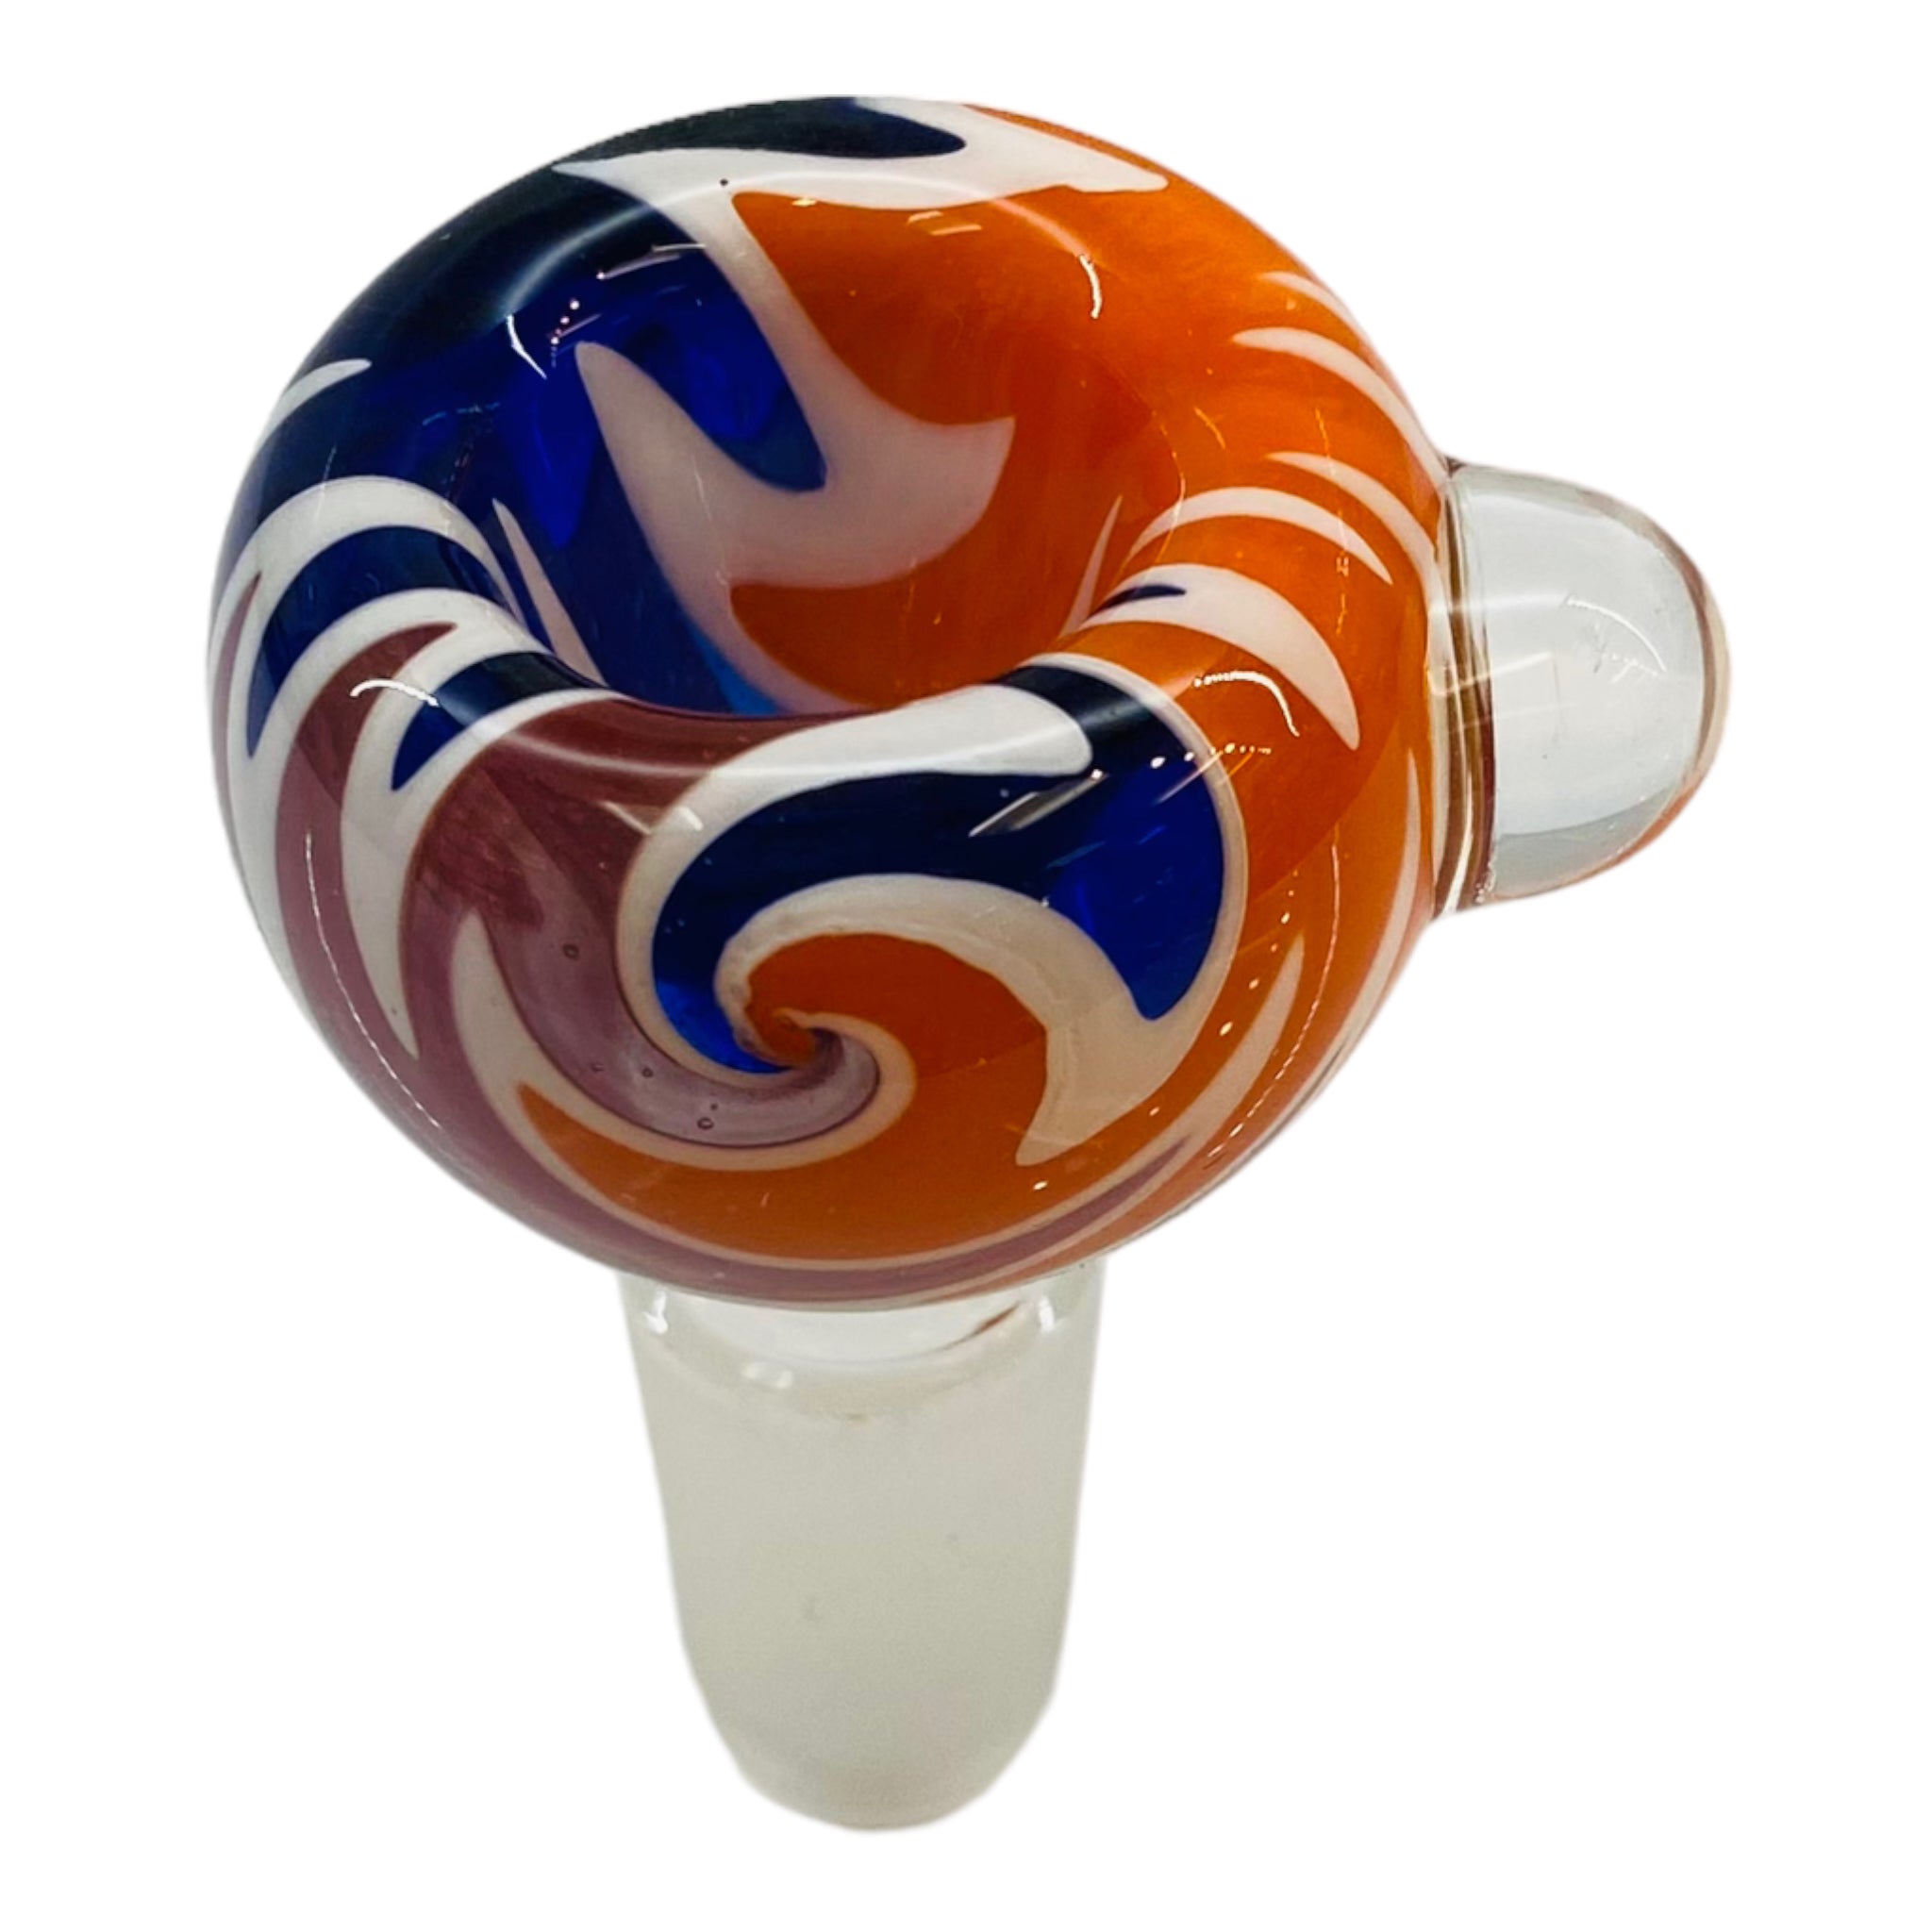 14mm Flower Bowl - Push Bubble With Wig Wag Spirals - Orange, Red, And Blue